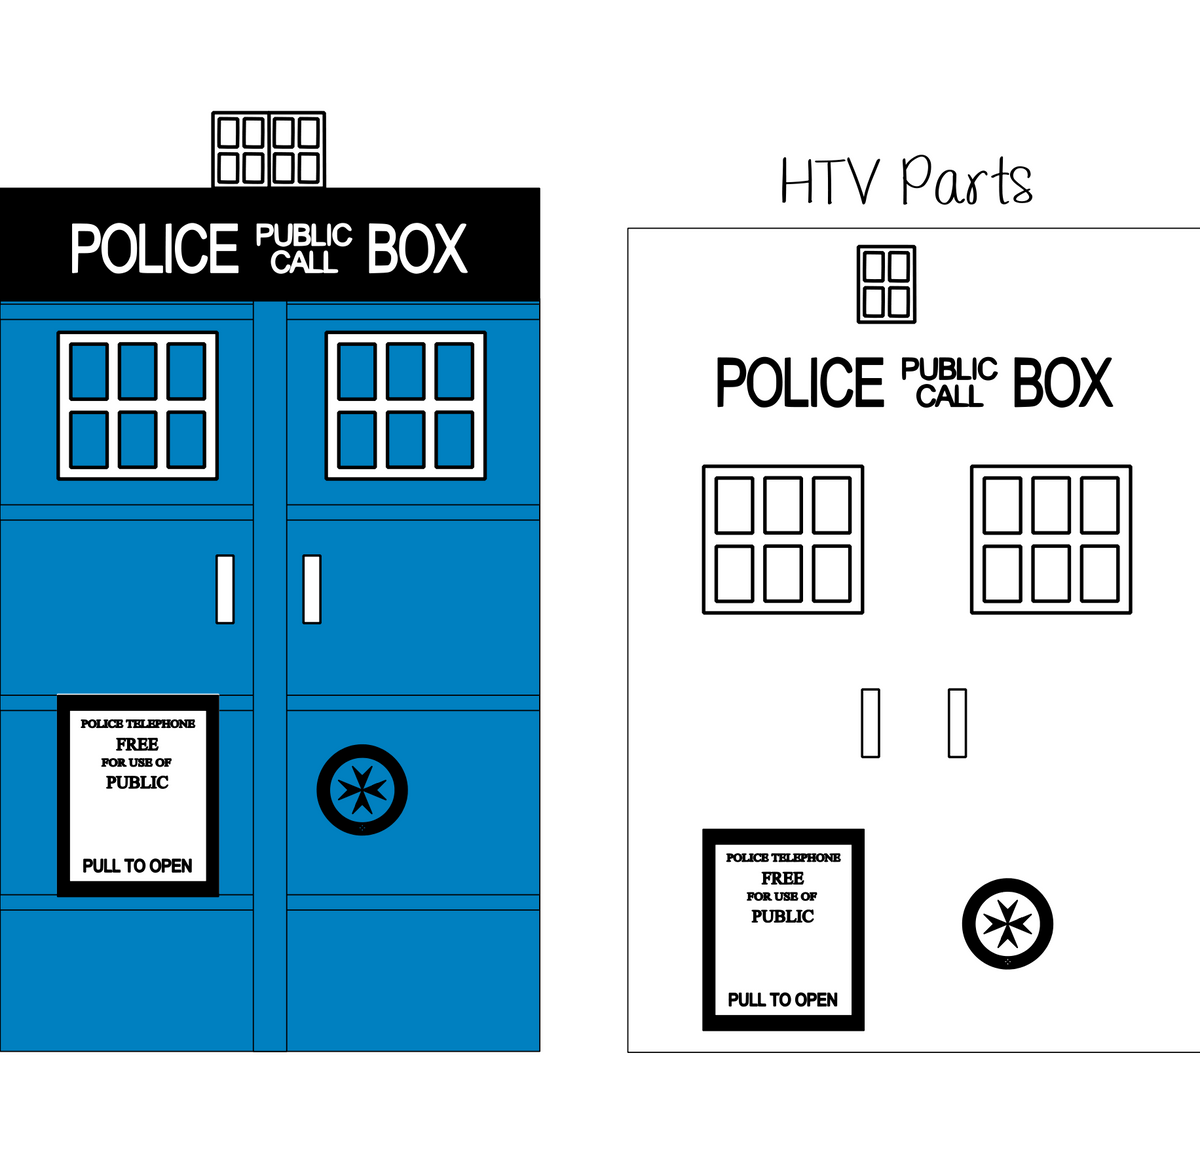 Download Dr. Who | Tardis Digital DXF | PNG | SVG Files! - Claire B's Caboodles